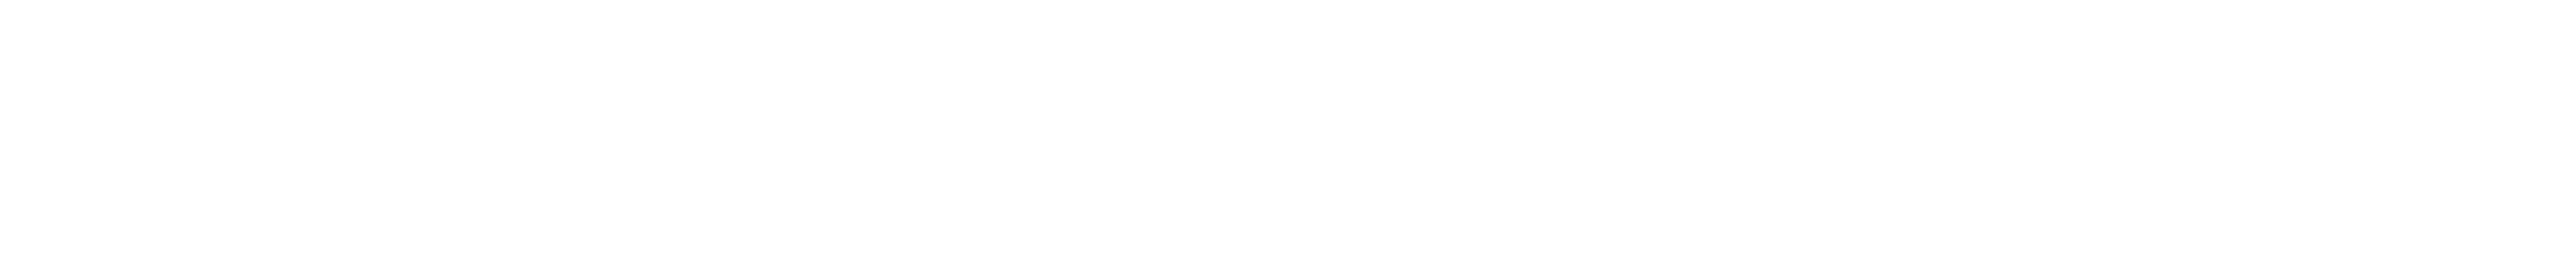 overlay_white_gradient.png